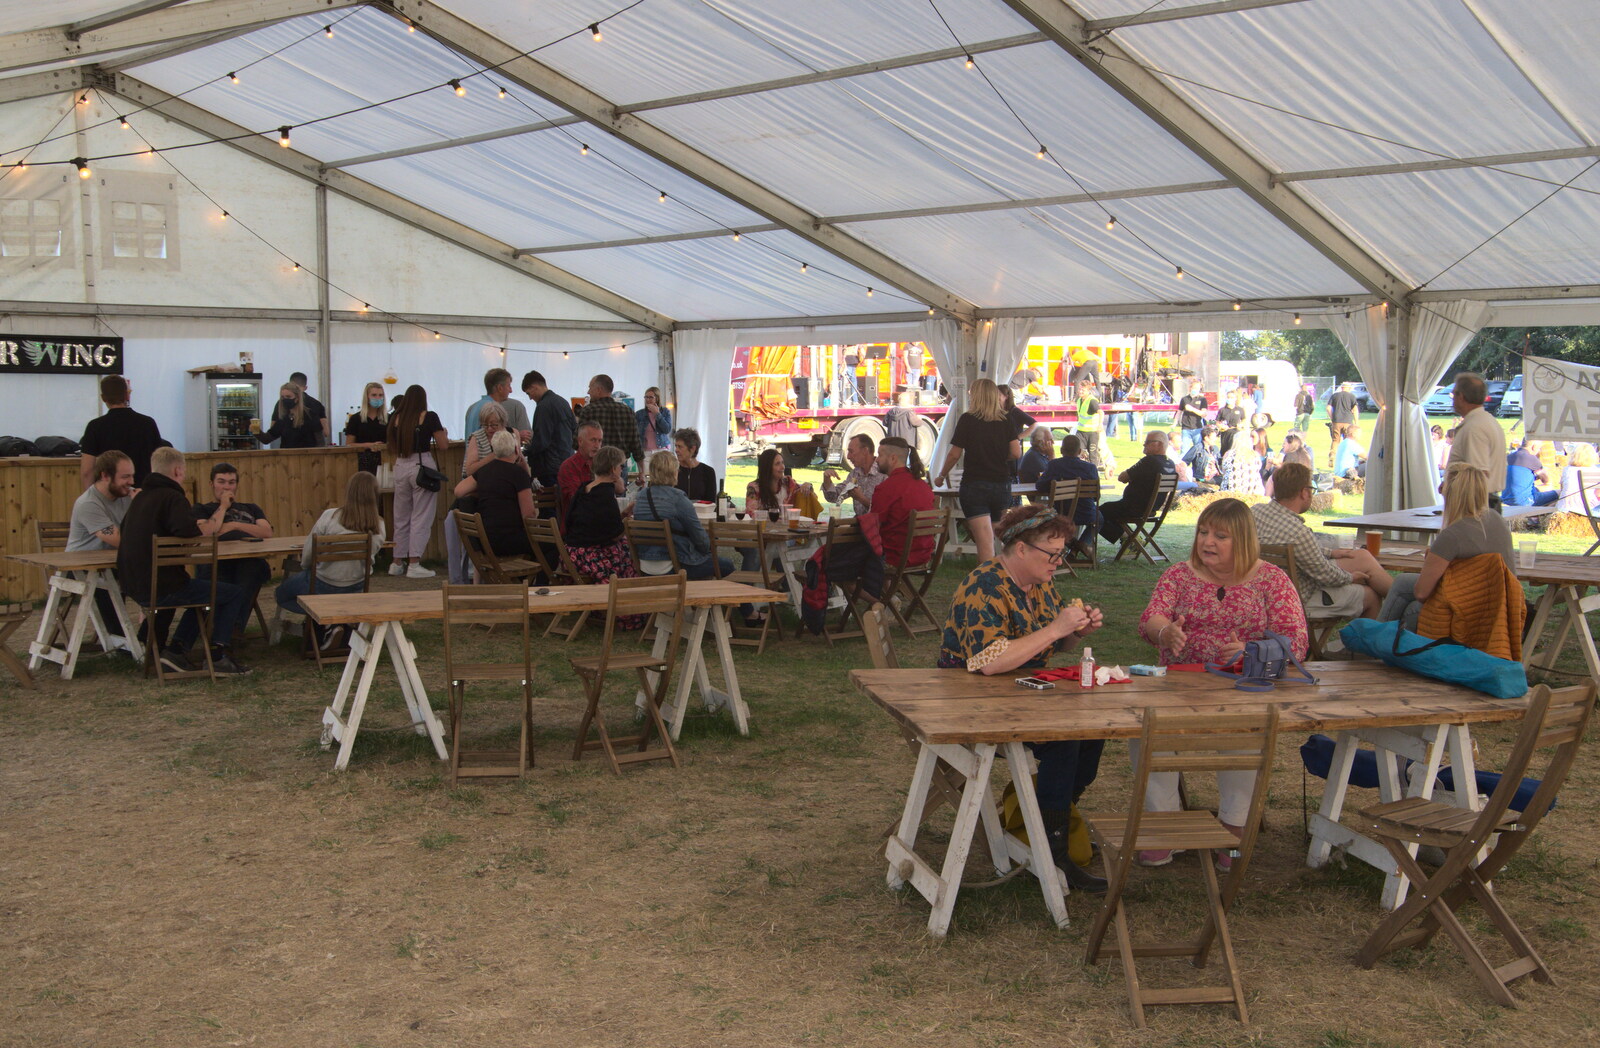 Inside the Star Wing marquee from Star Wing's Hops and Hogs Festival, Redgrave, Suffolk - 12th September 2020